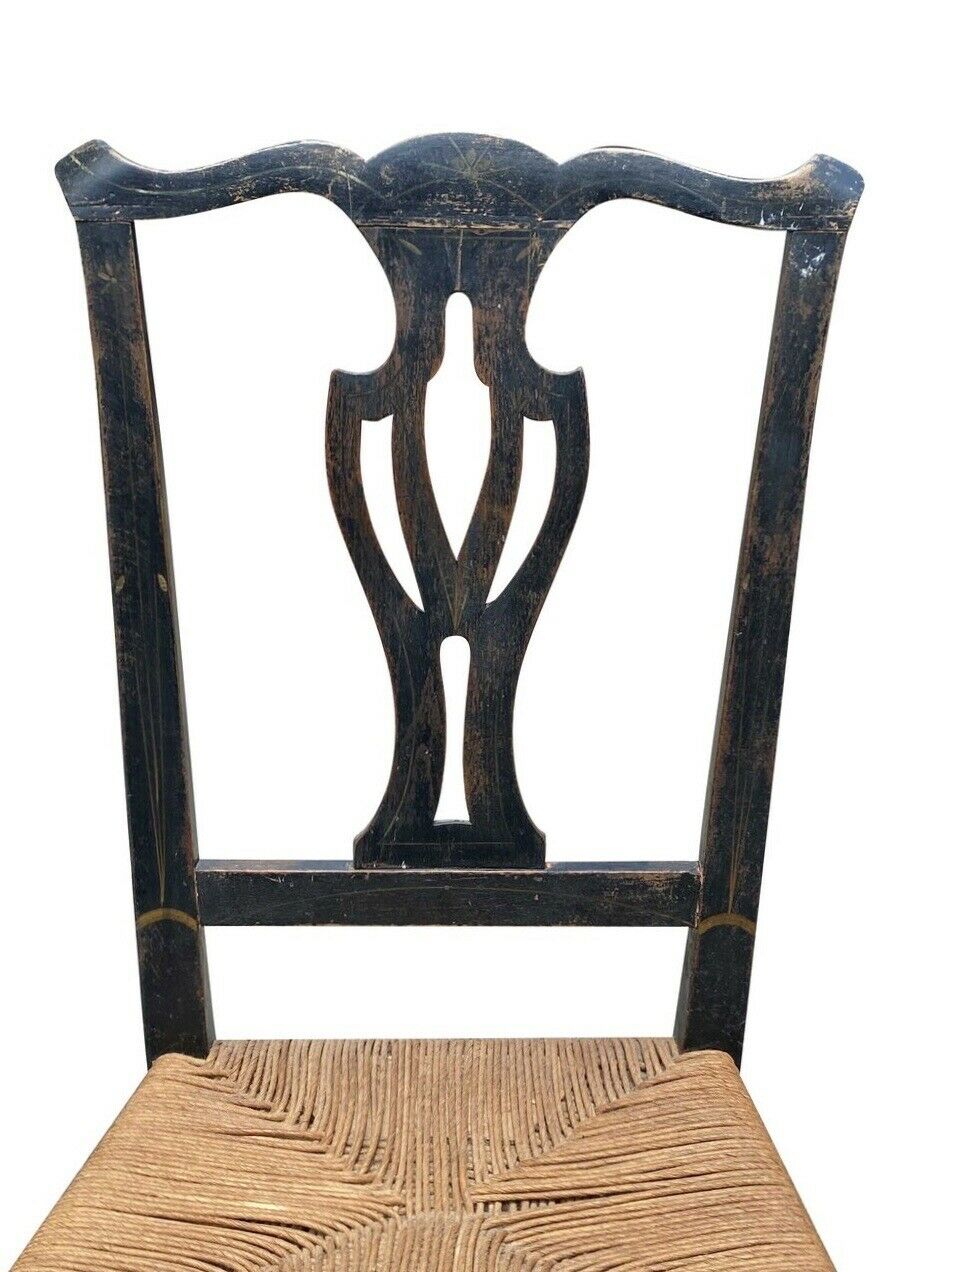 18TH C ANTIQUE NEW ENGLAND COUNTRY PRIMITIVE CHIPPENDALE SIDE CHAIR W/ RUSH SEAT